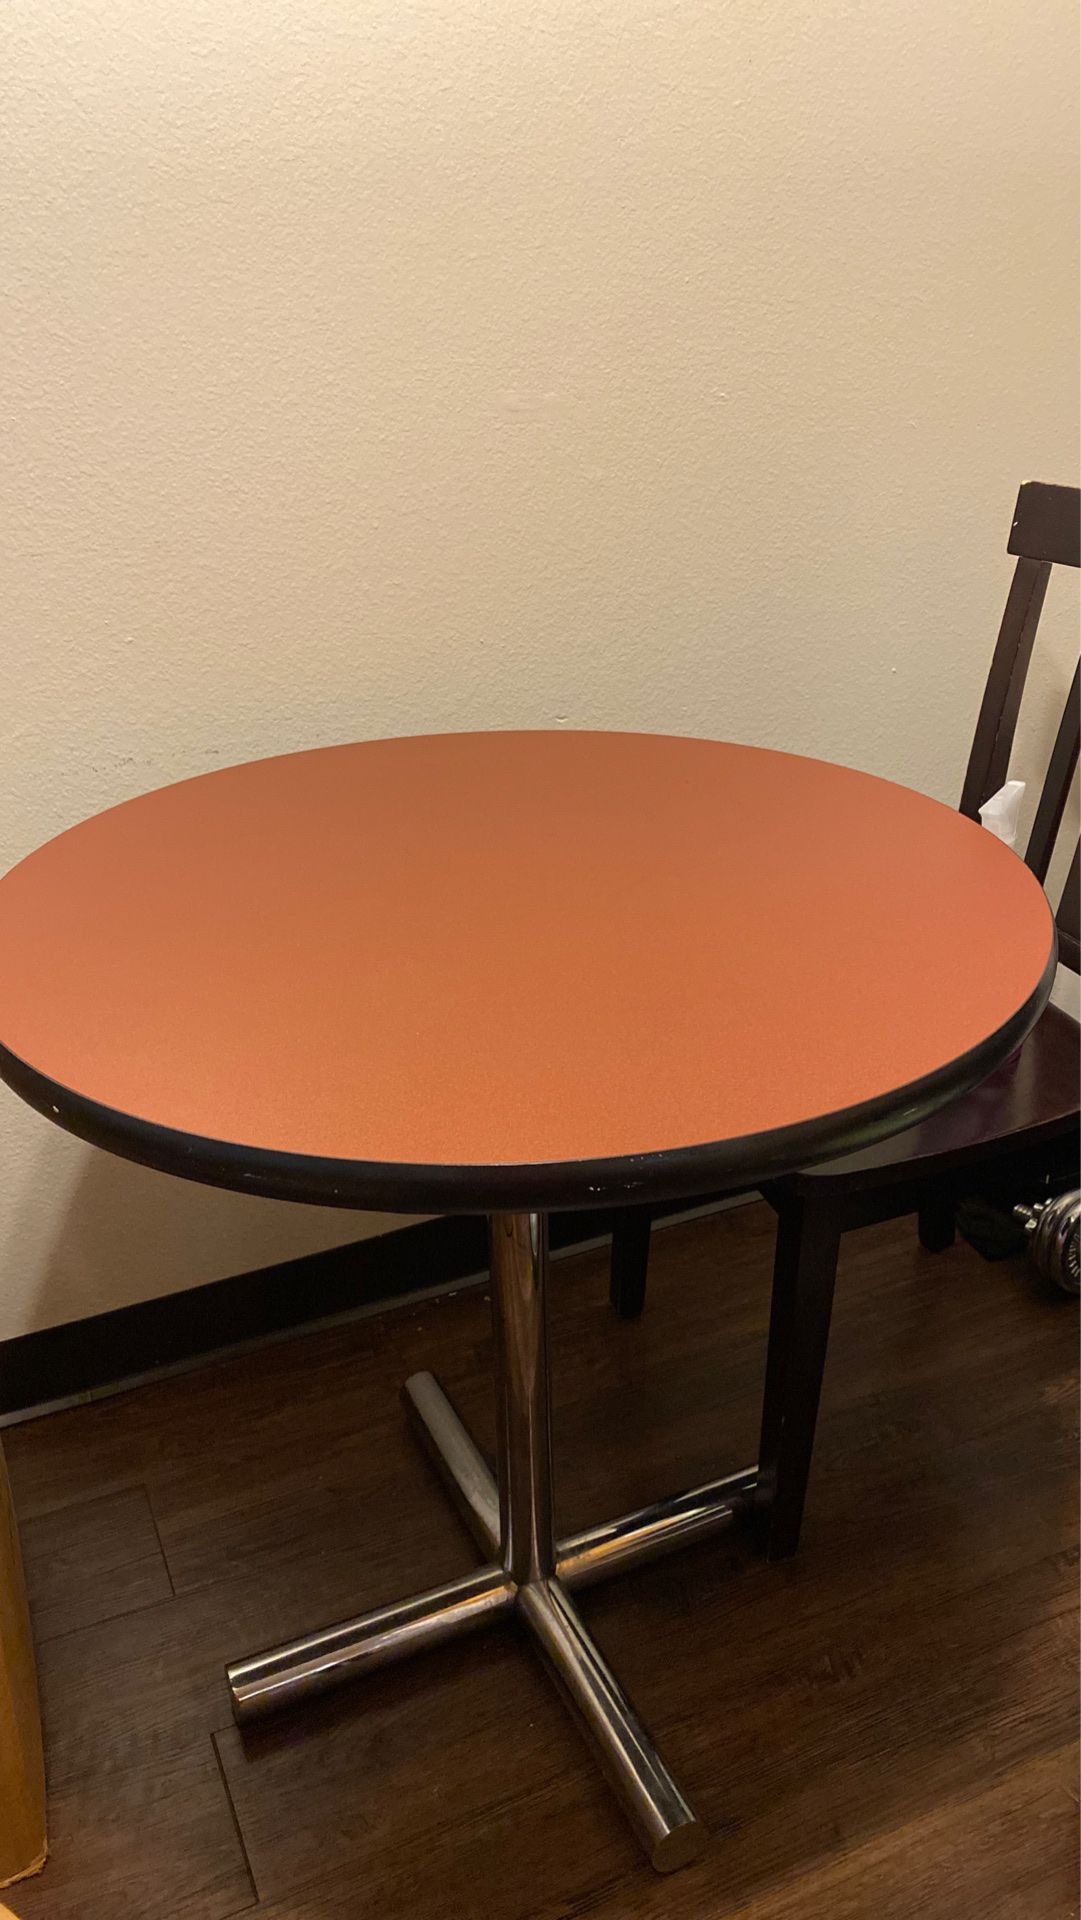 Small kitchen or patio table